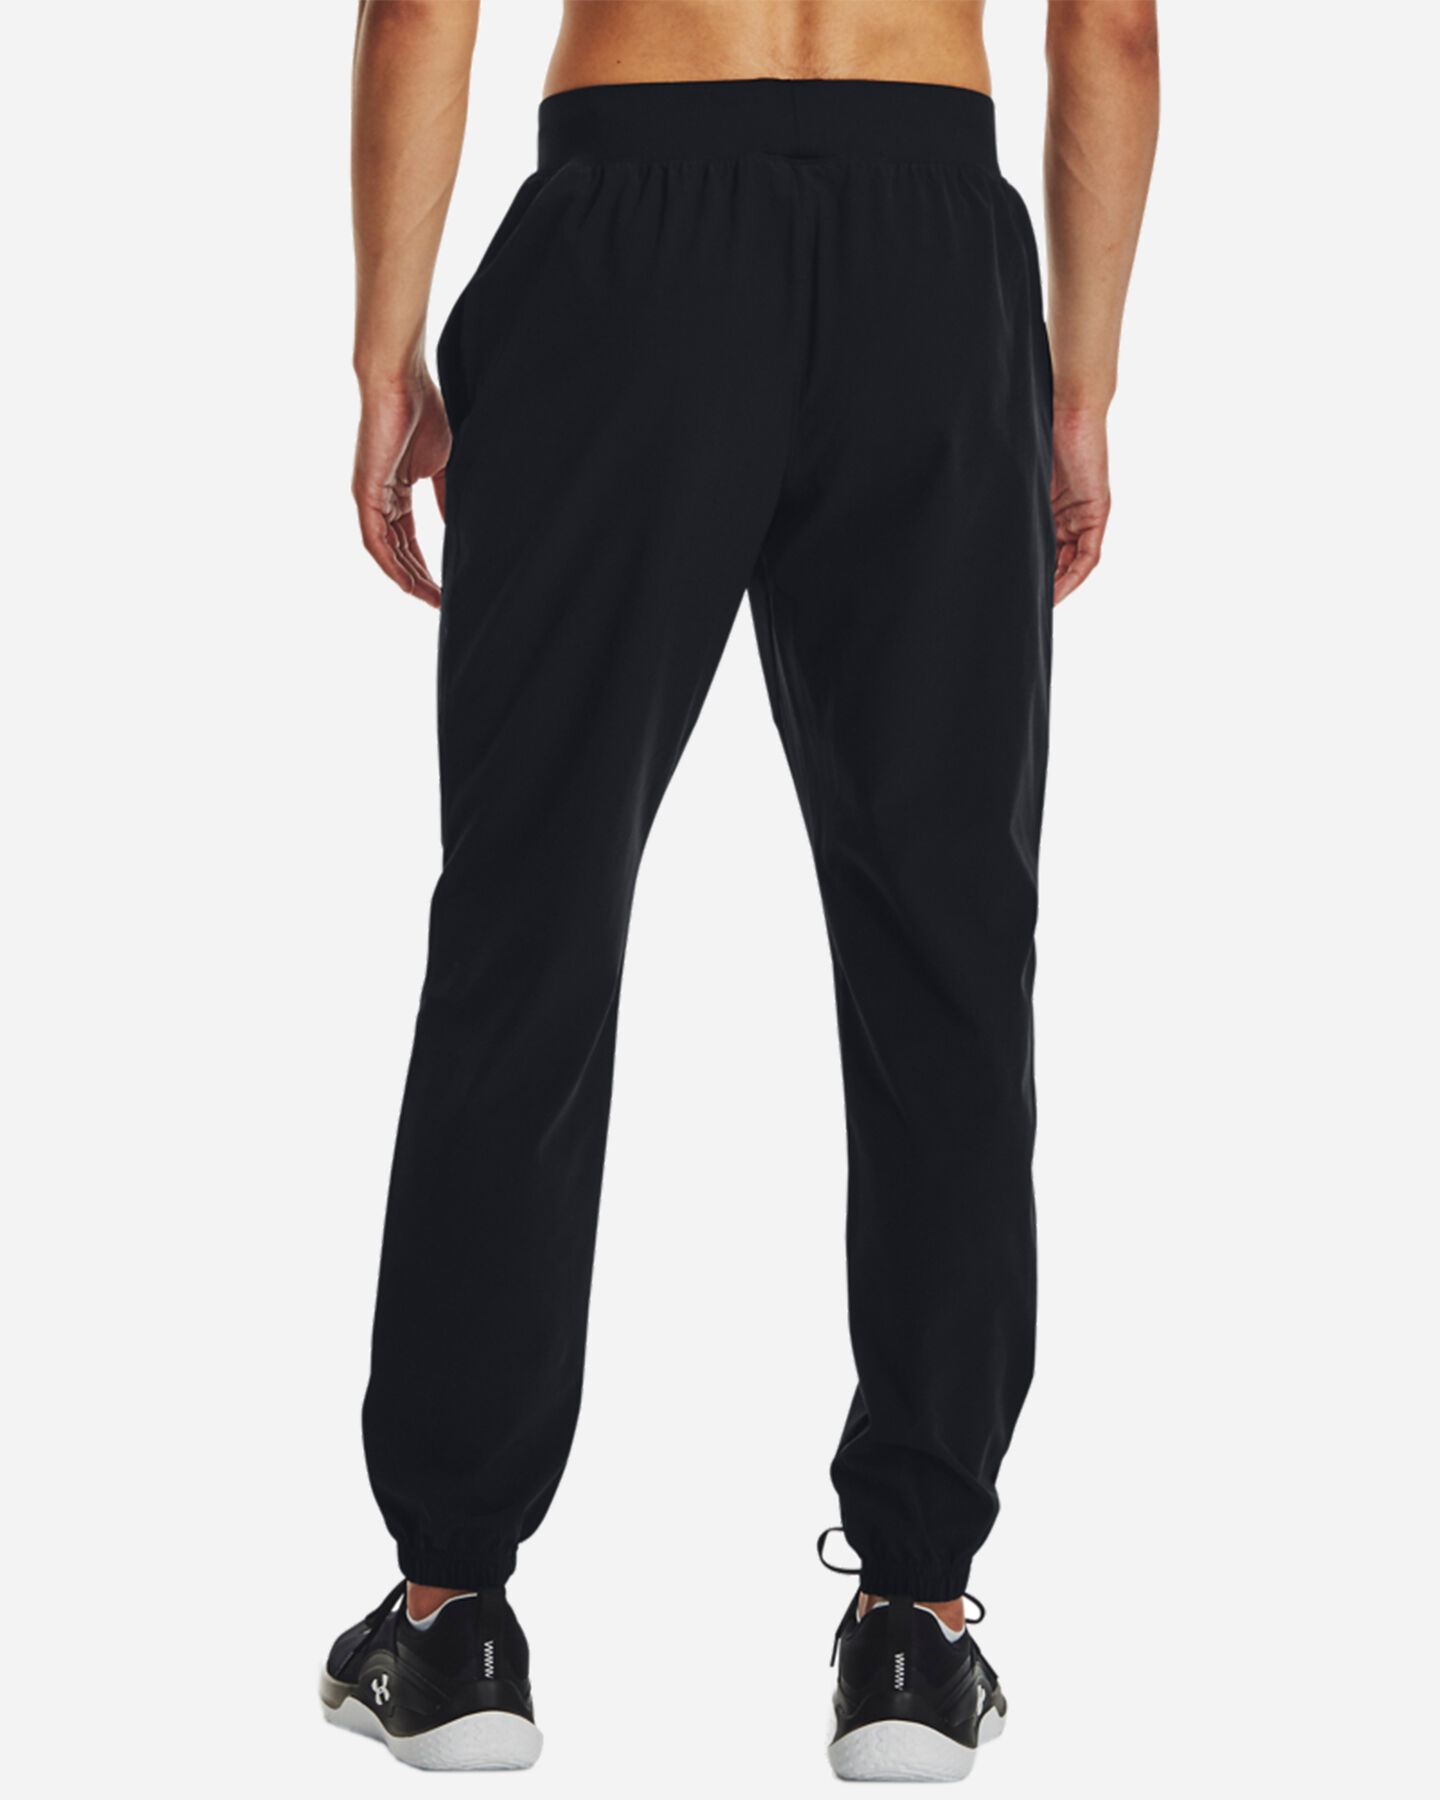  Pantalone training UNDER ARMOUR STRETCH WOVEN M S5641374|0001|SM scatto 3